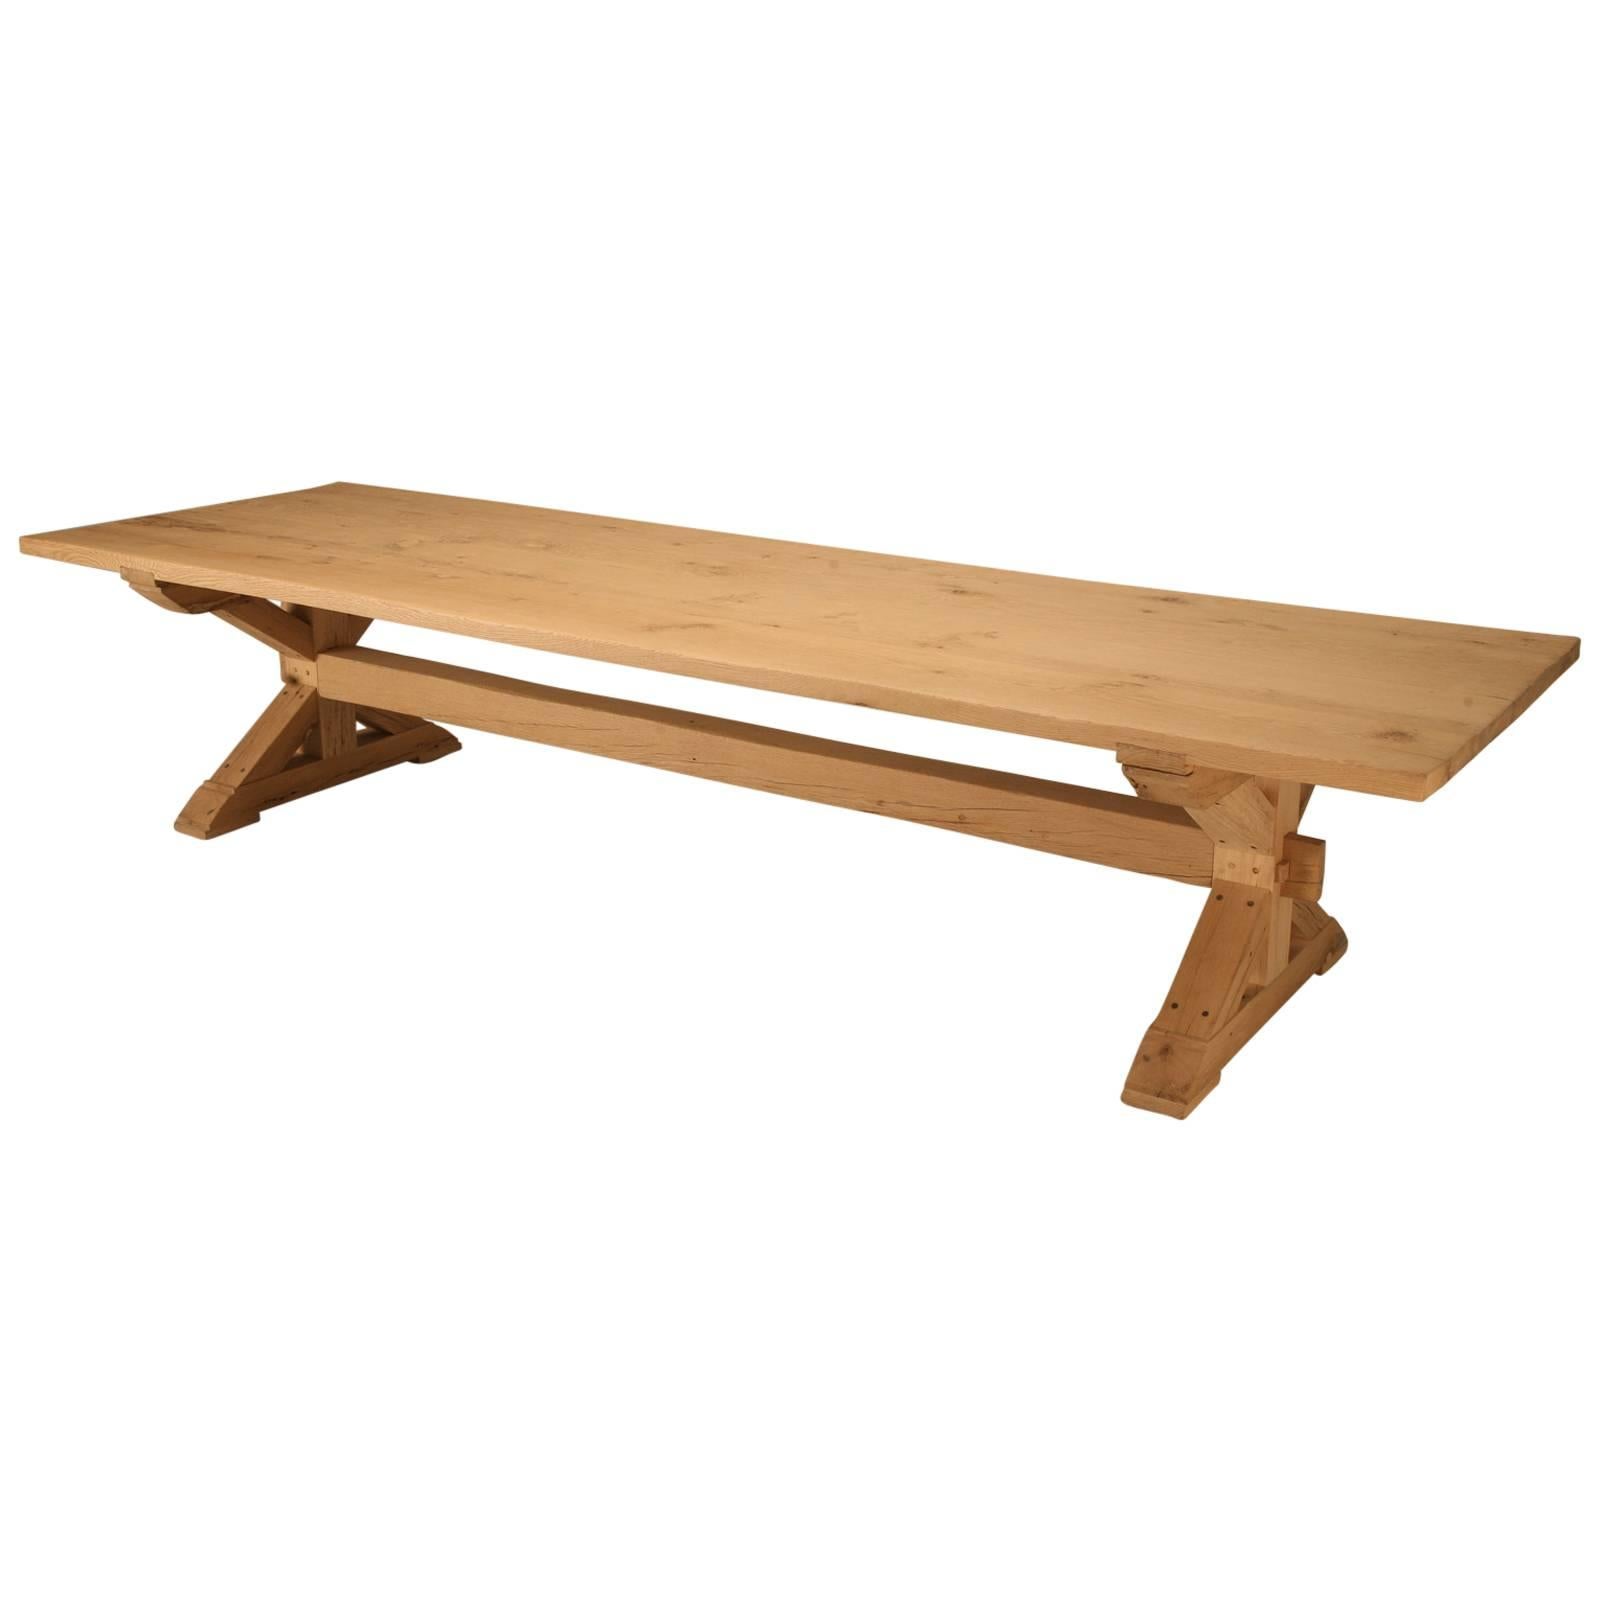 Custom Made Farm Table in Reclaimed White Oak Available Any Size by Old Plank